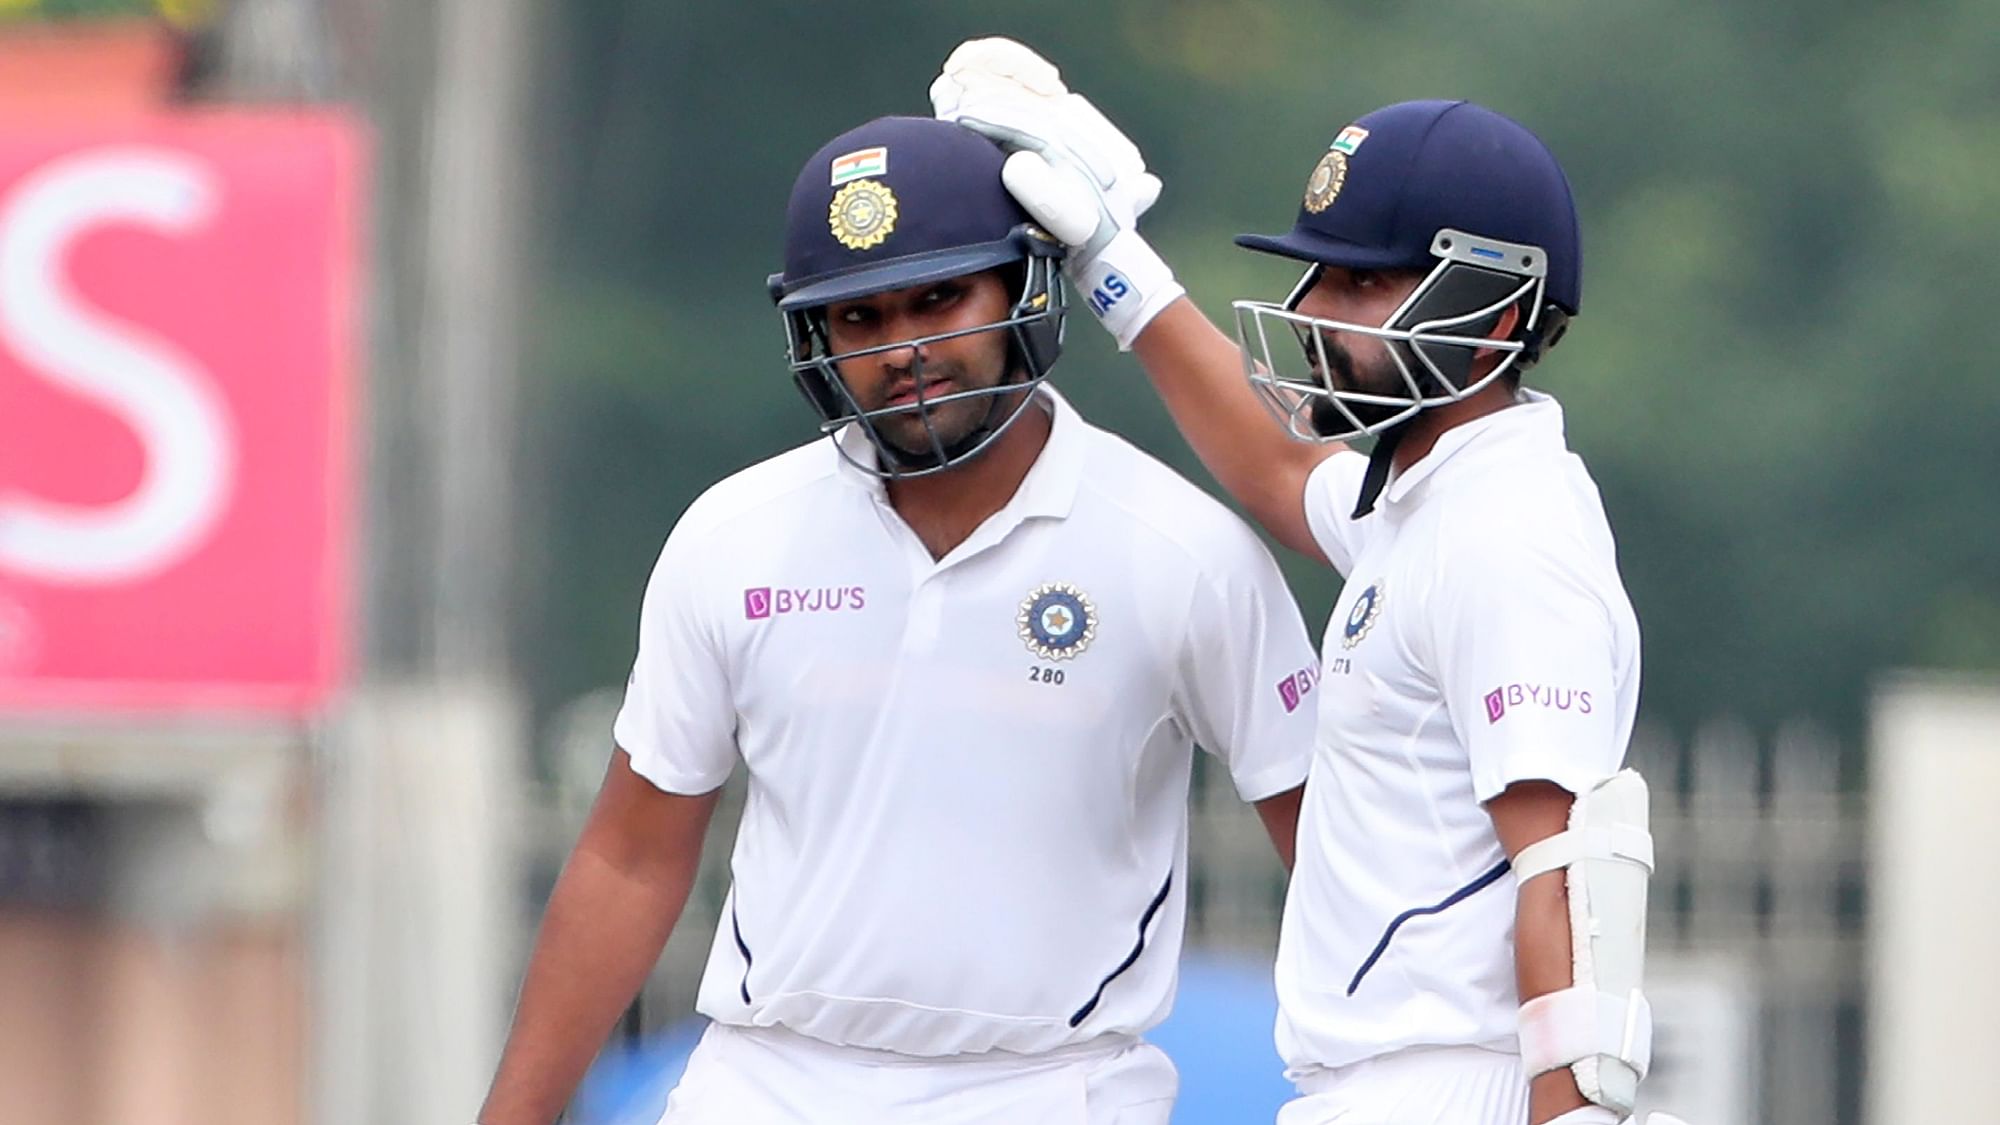 India vs South Africa 3rd Test Match LIVE Cricket Score Updates: Rohit Sharma and Ajinkya Rahane put up a 100-run stand for the fourth wicket.